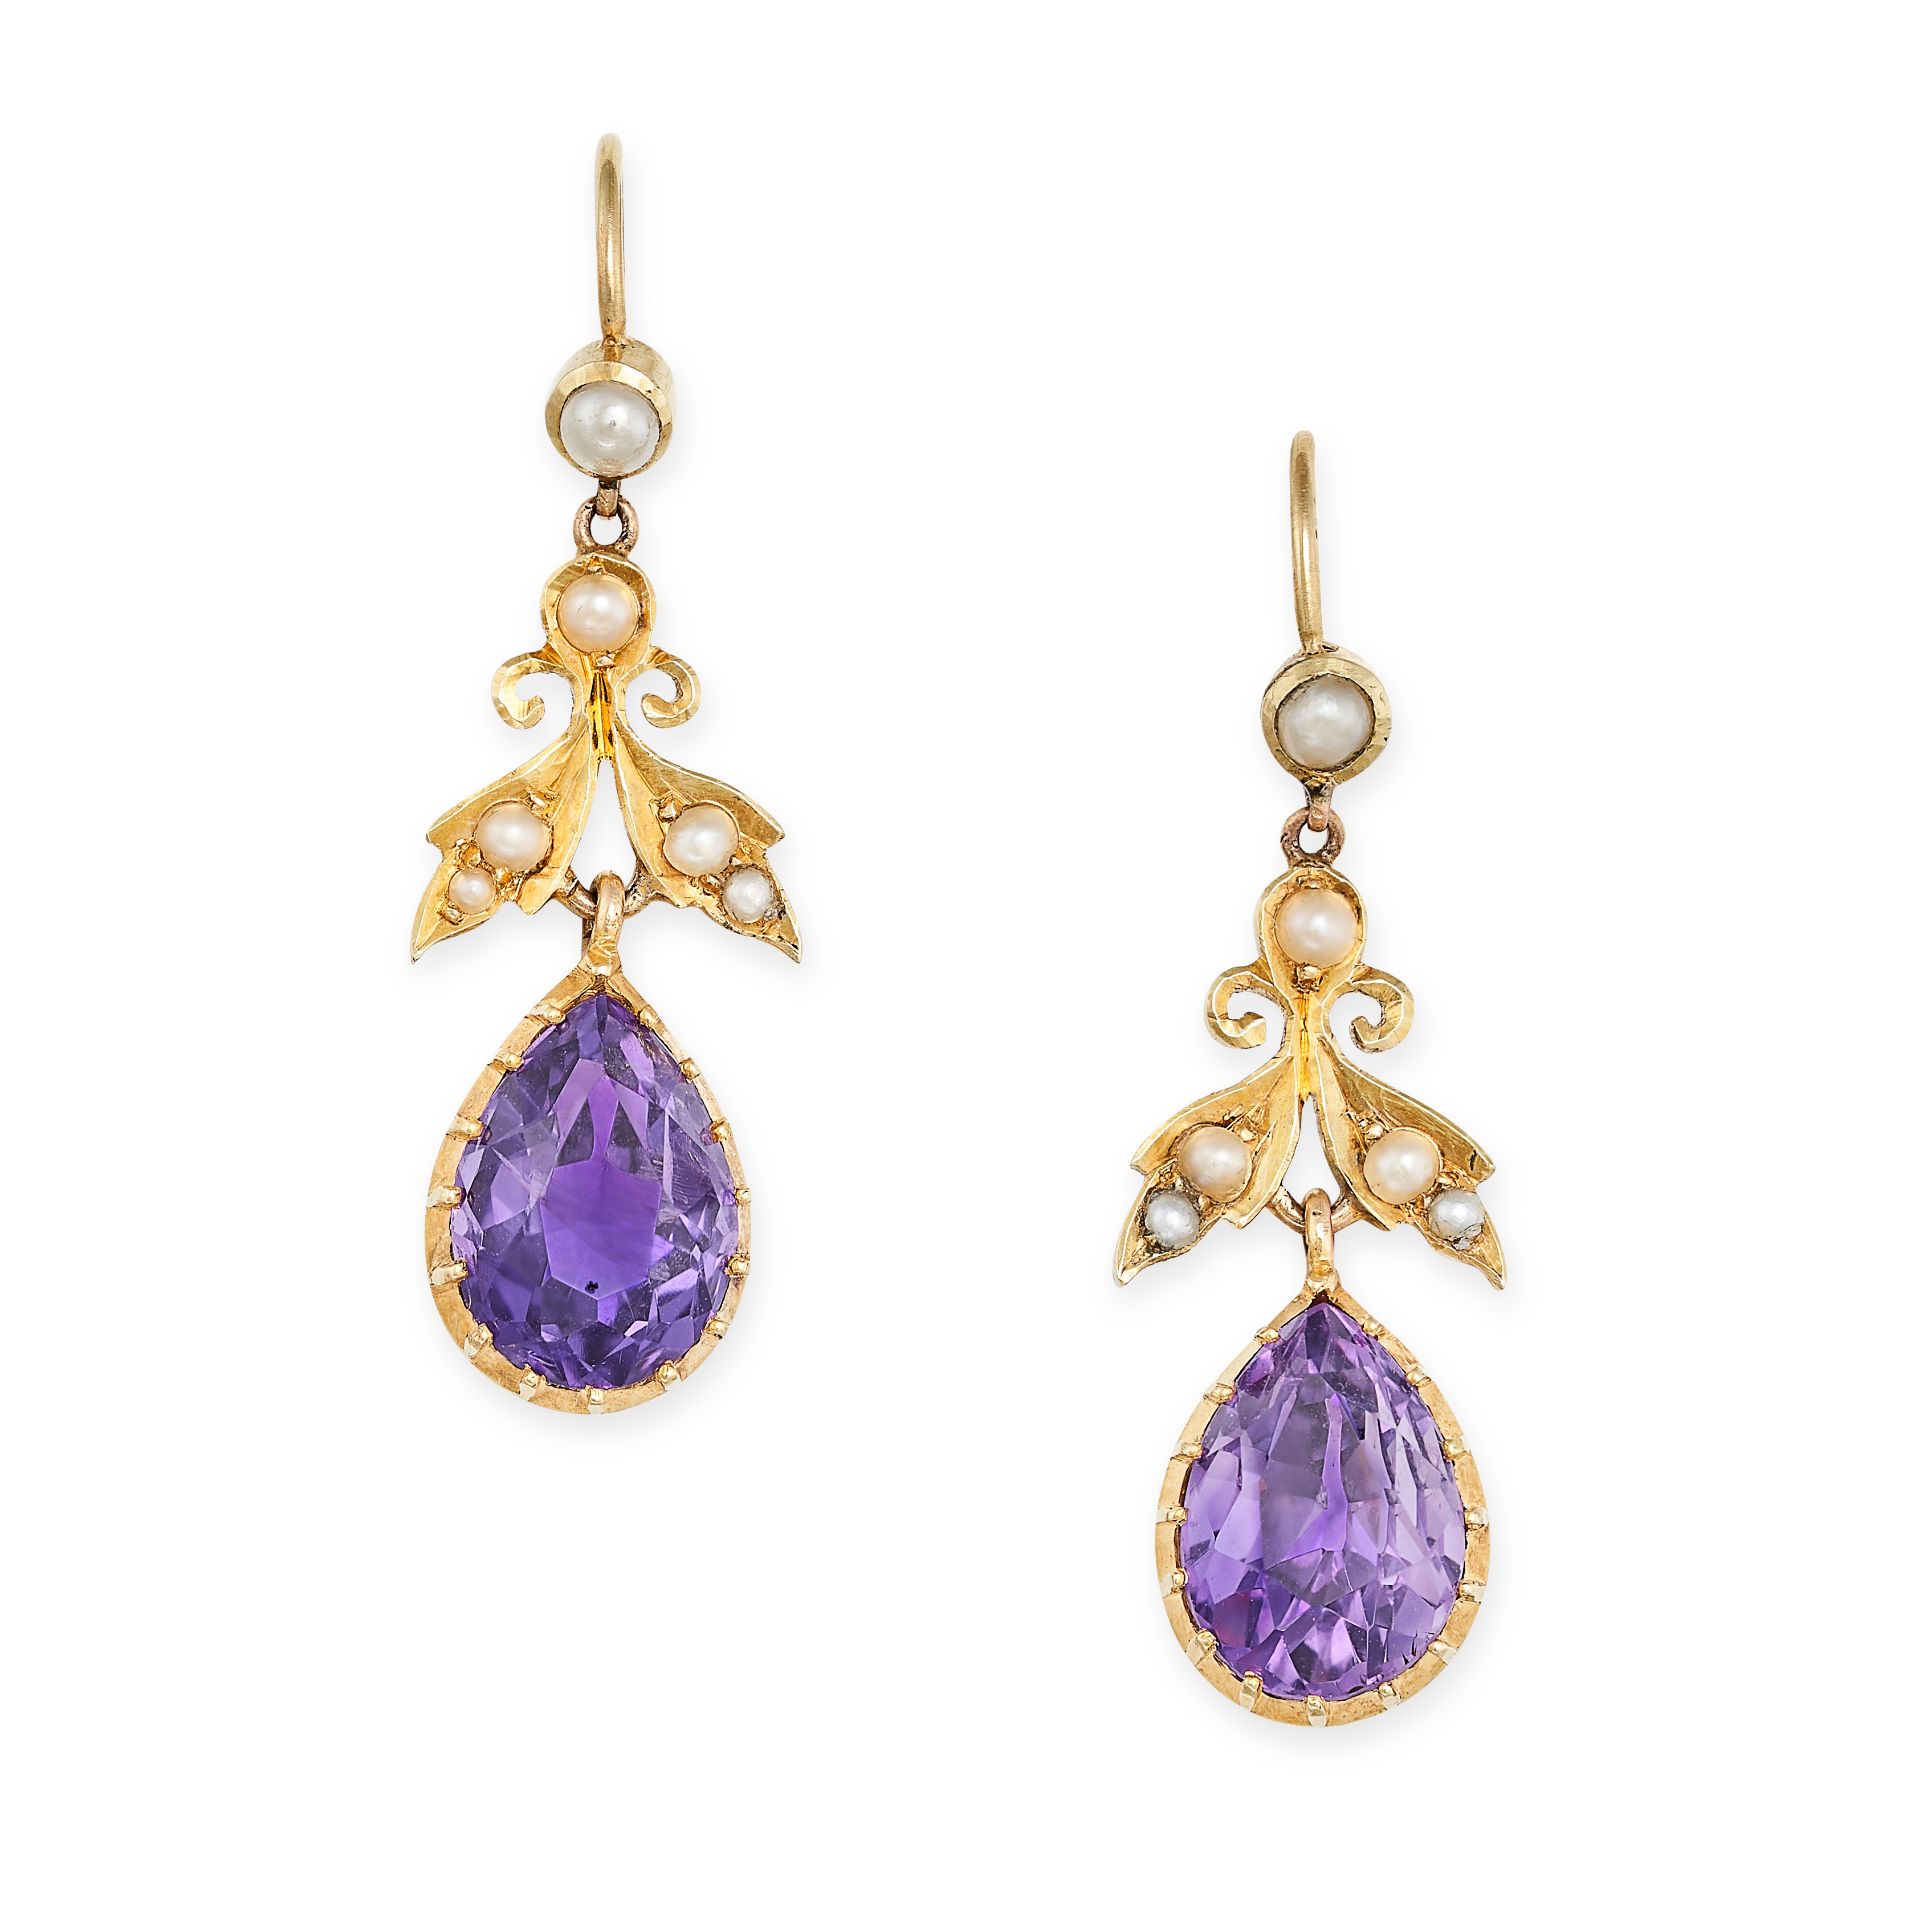 NO RESERVE - A PAIR OF AMETHYST AND PEARL DROP EARRINGS in 15ct yellow gold, each comprising a fo...